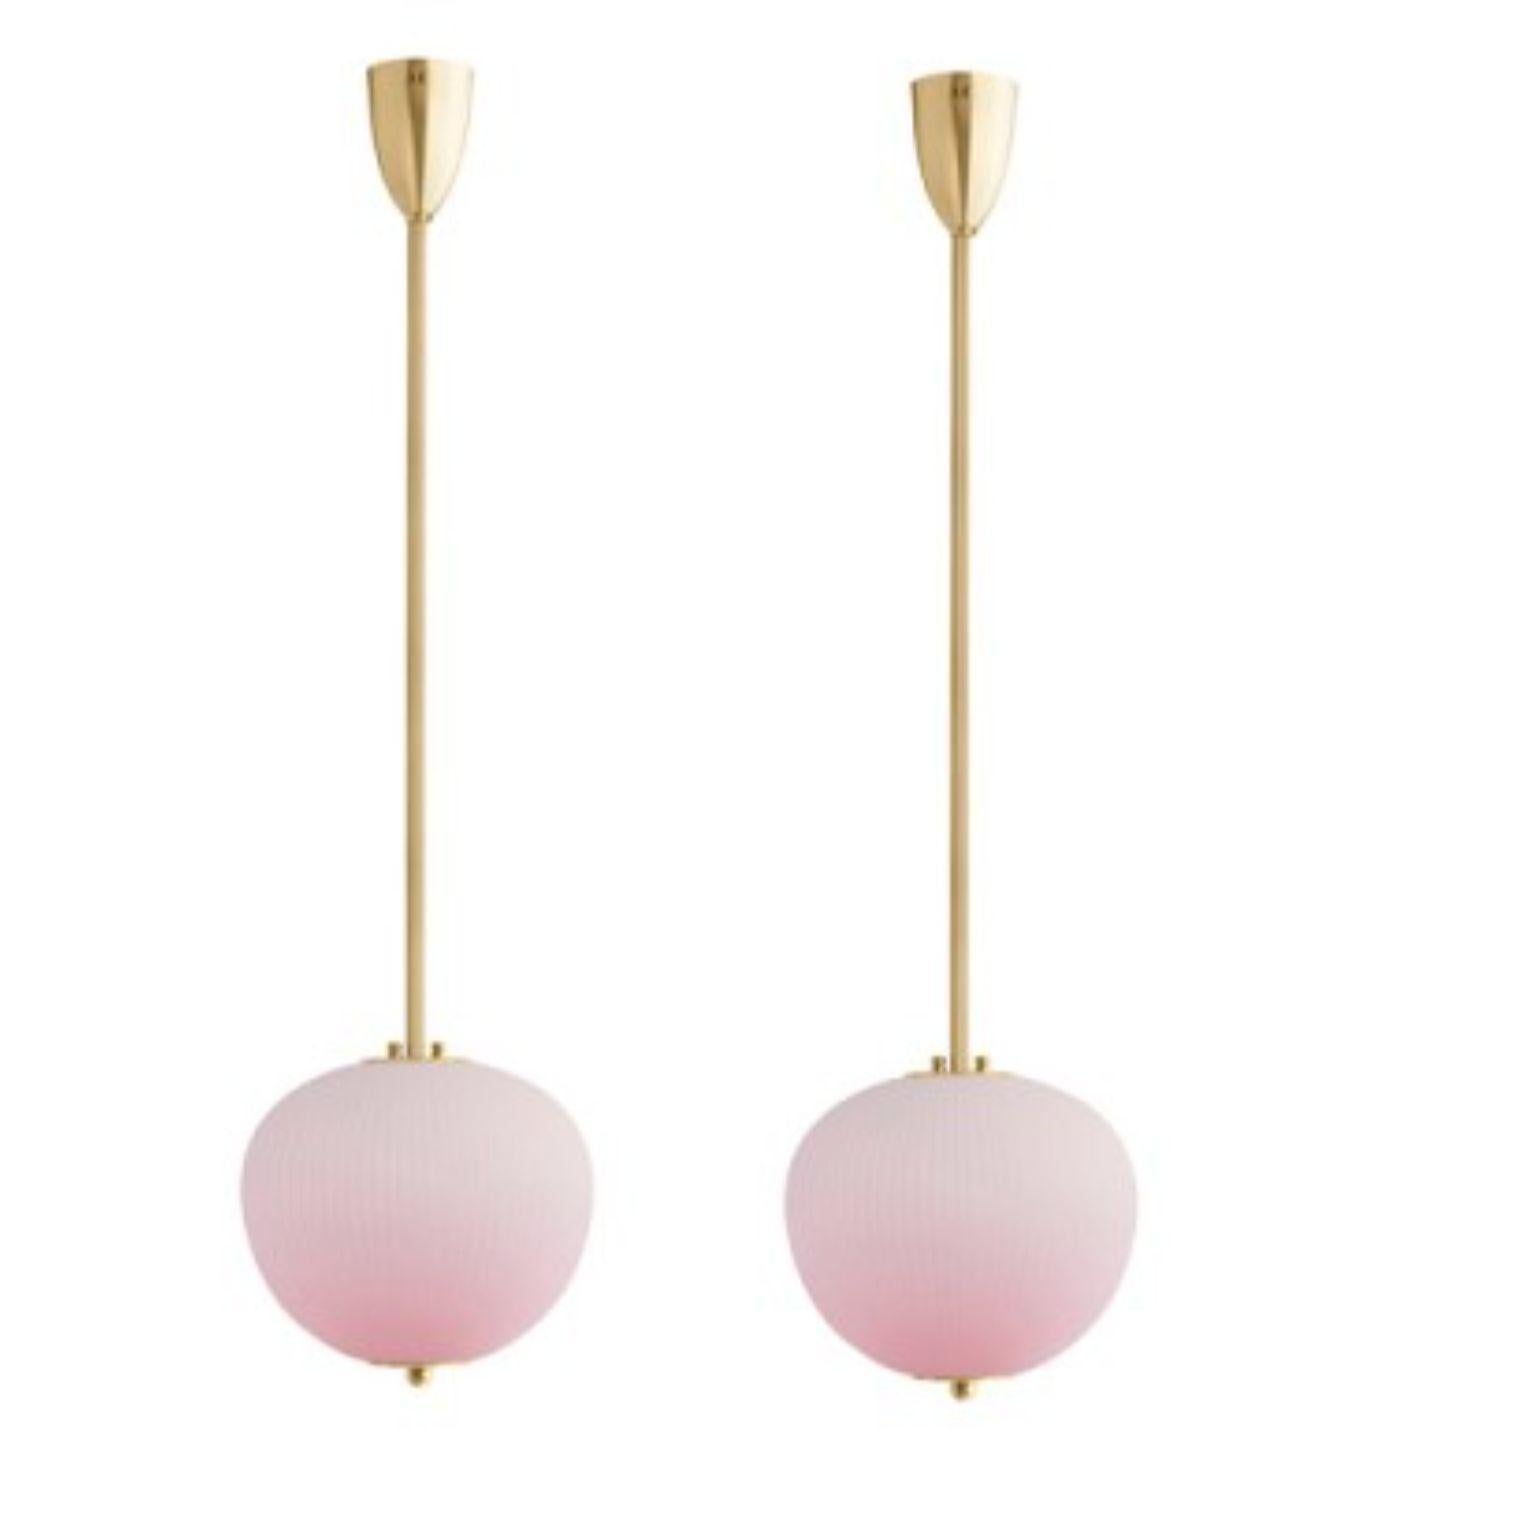 Pendant China 03 by Magic circus editions
Dimensions: H 90 x W 26.2 x D 26.2 cm, also available in H 110, 130, 150, 175, 190
Materials: Brass, mouth blown glass sculpted with a diamond saw
Colour: soft rose

Available finishes: Brass,